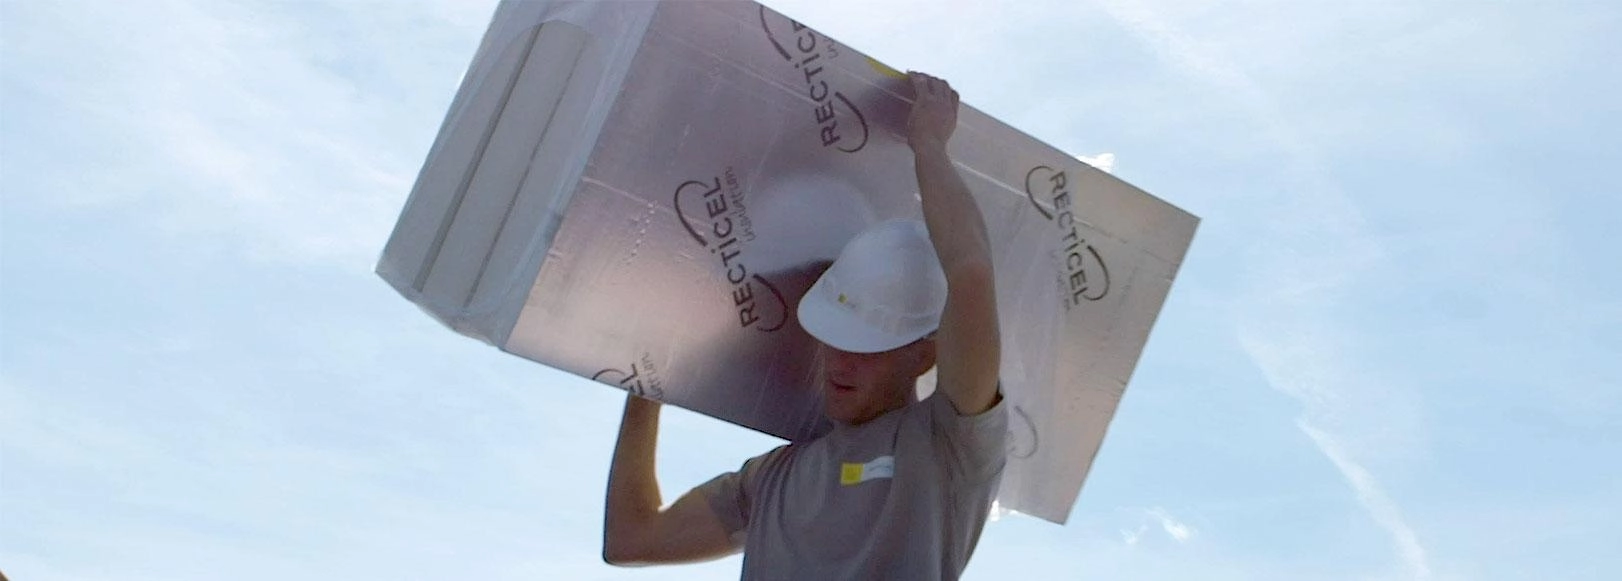 Recticel Insulation introduction banner - man on flat roof with insulation board